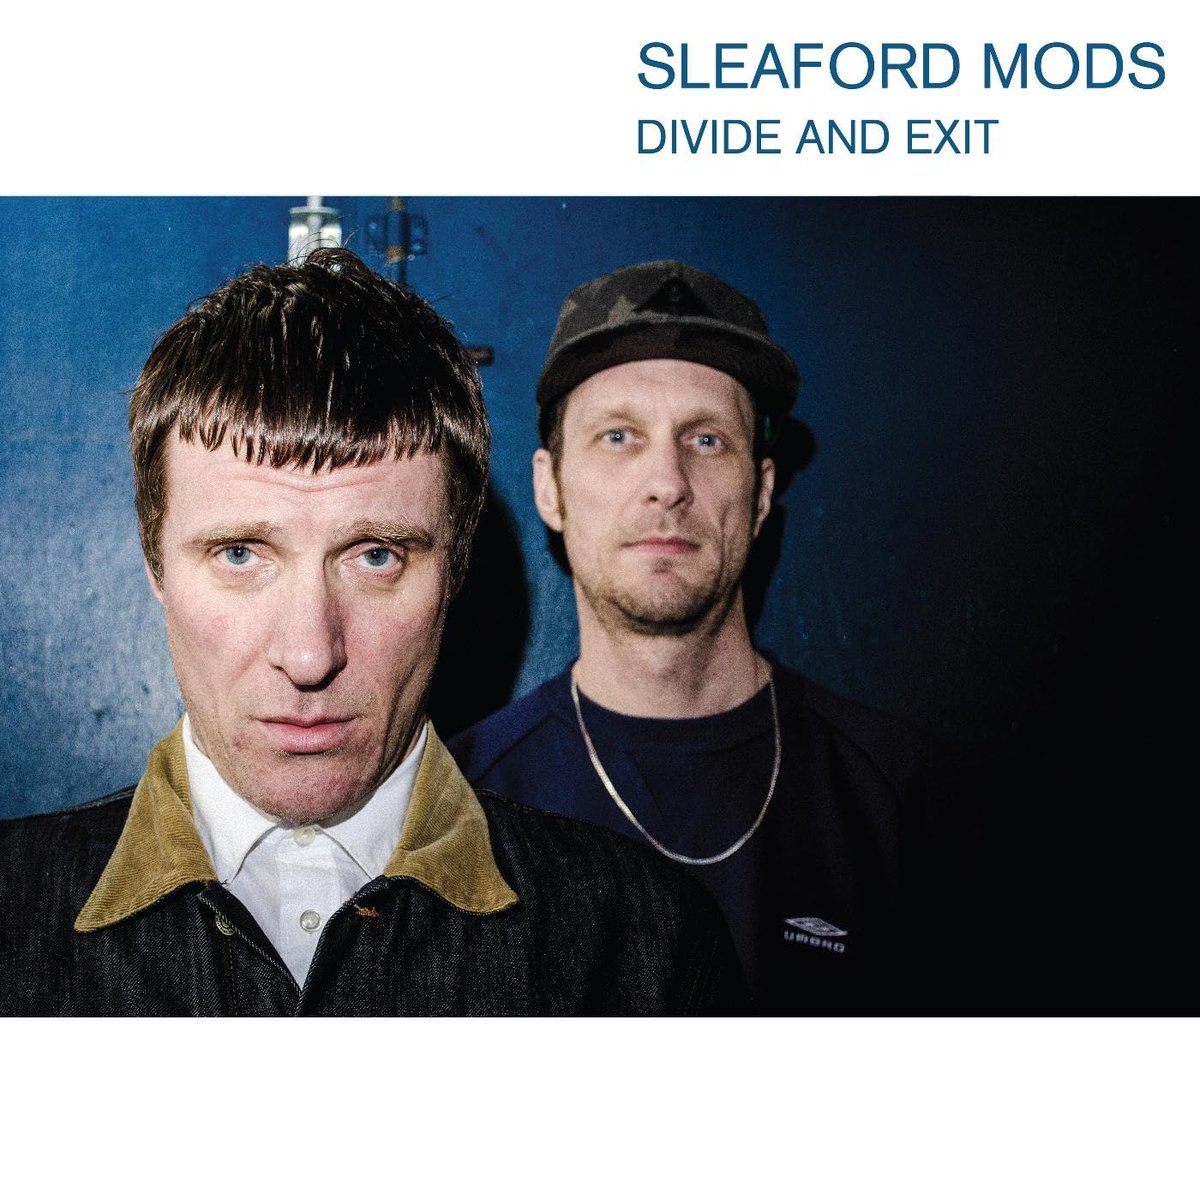 #SleaFordMods - Divide and Exit $25.99 [Pre-order] amzn.to/3QRyMM7